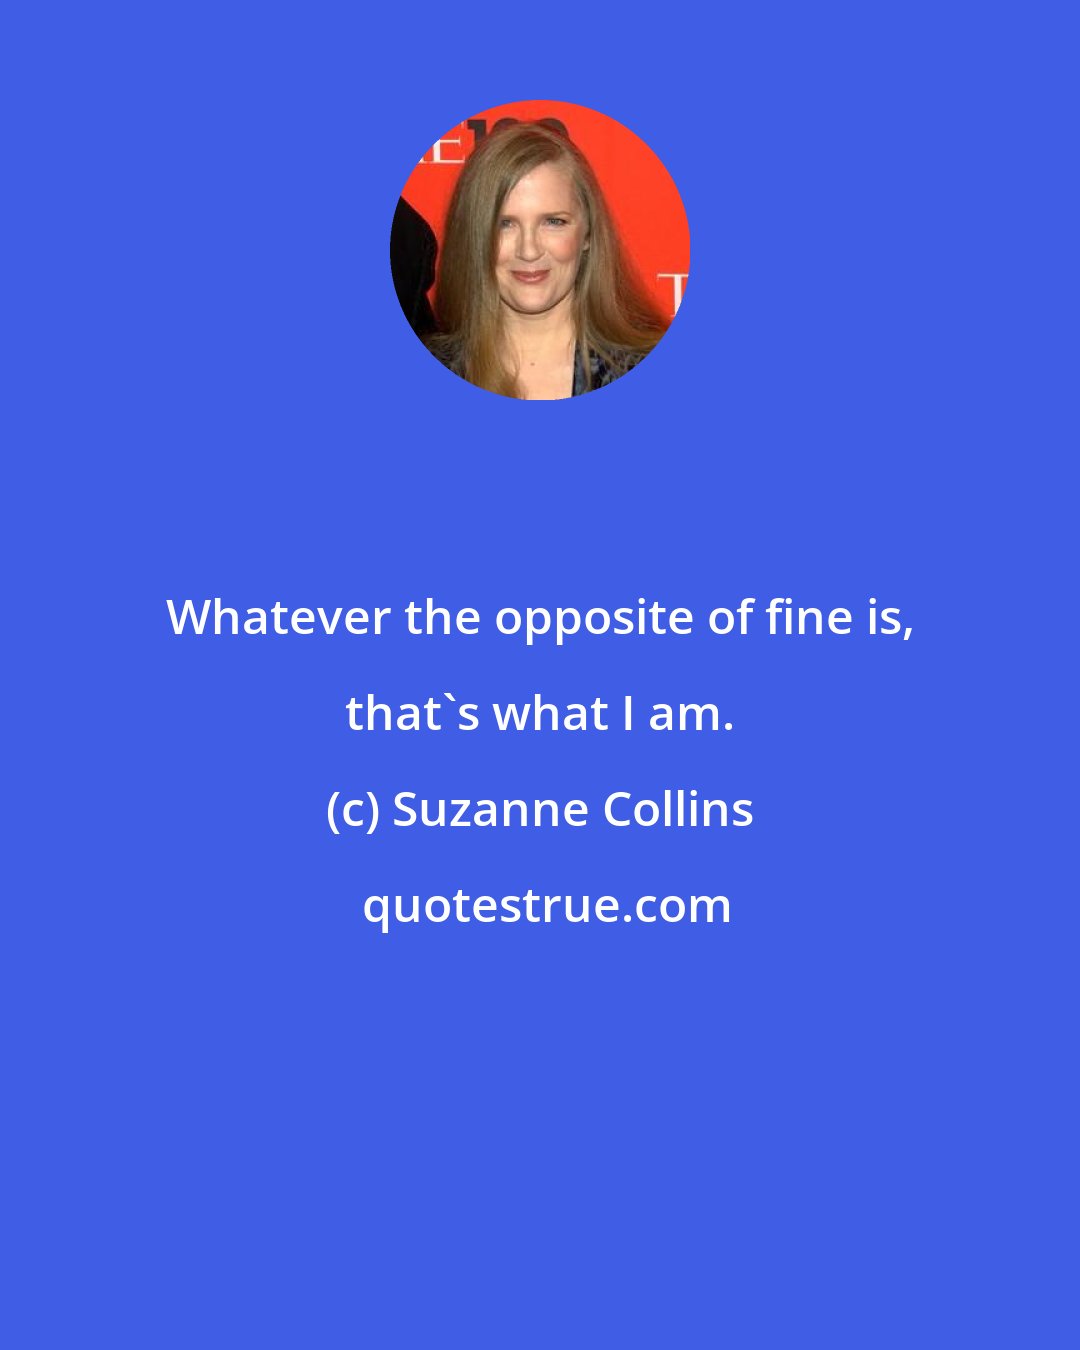 Suzanne Collins: Whatever the opposite of fine is, that's what I am.